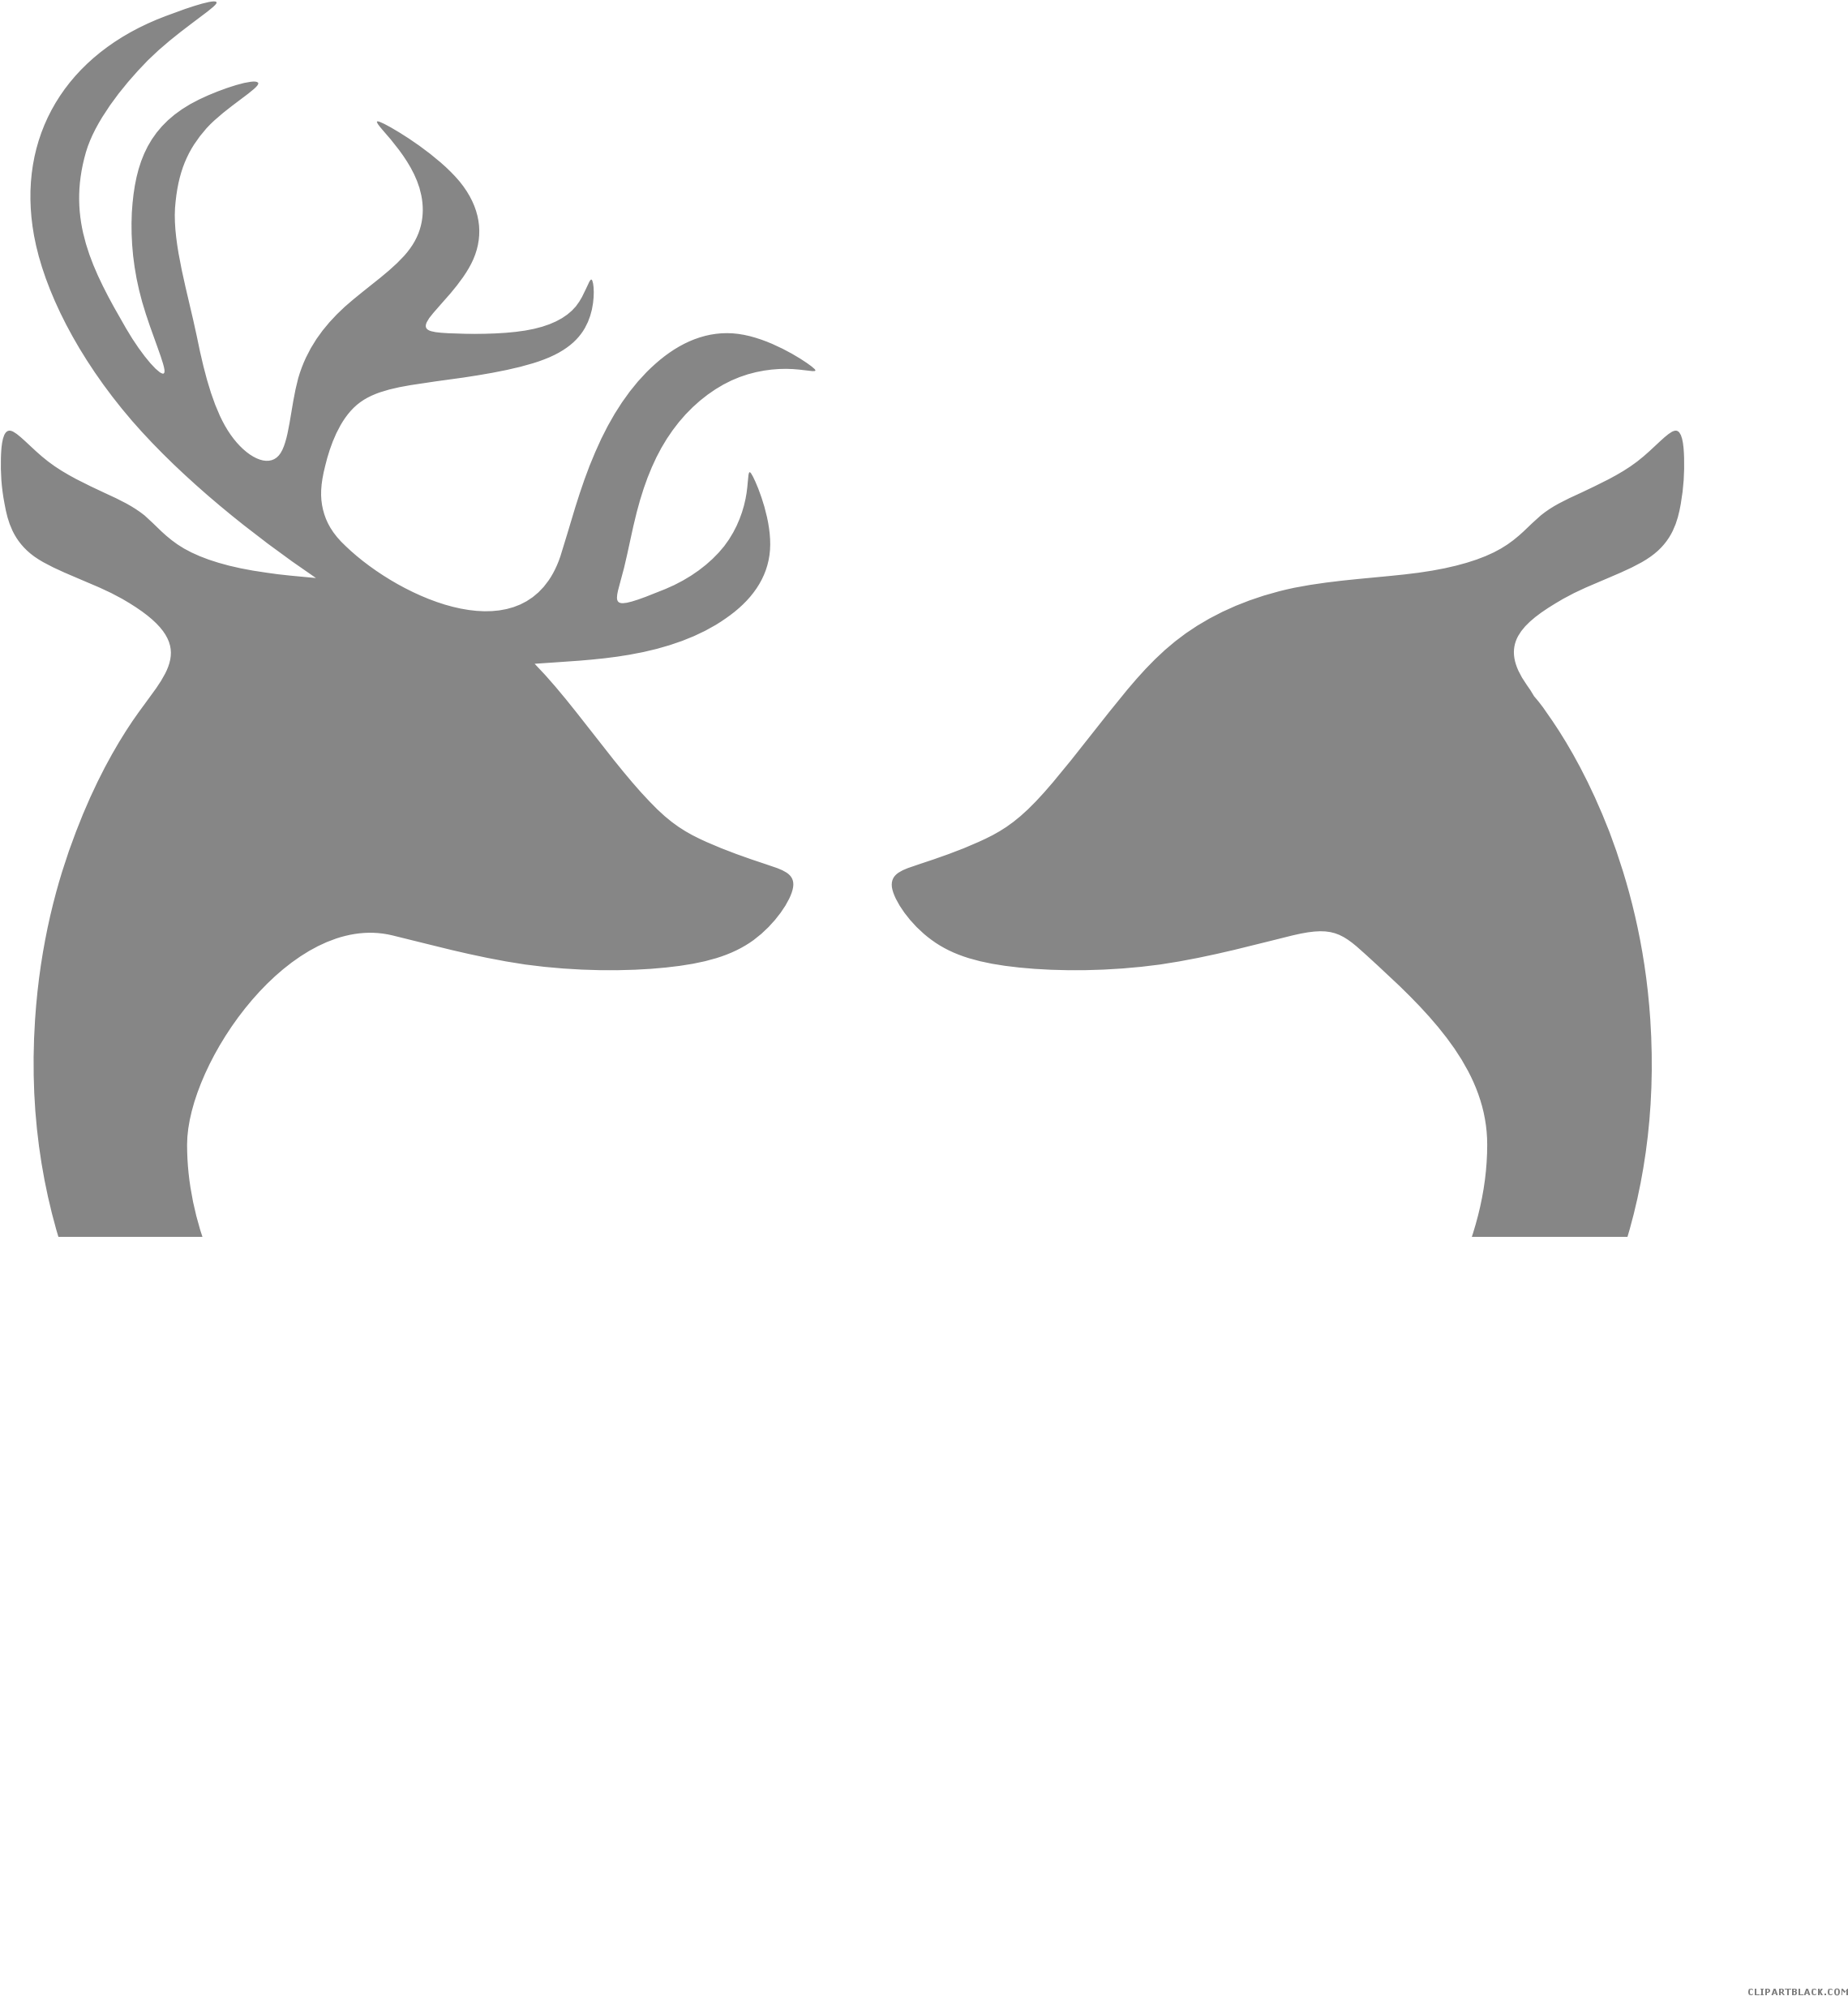 Deer Silhouette Animal Free Black White Clipart Images - Buck And Doe Heart...